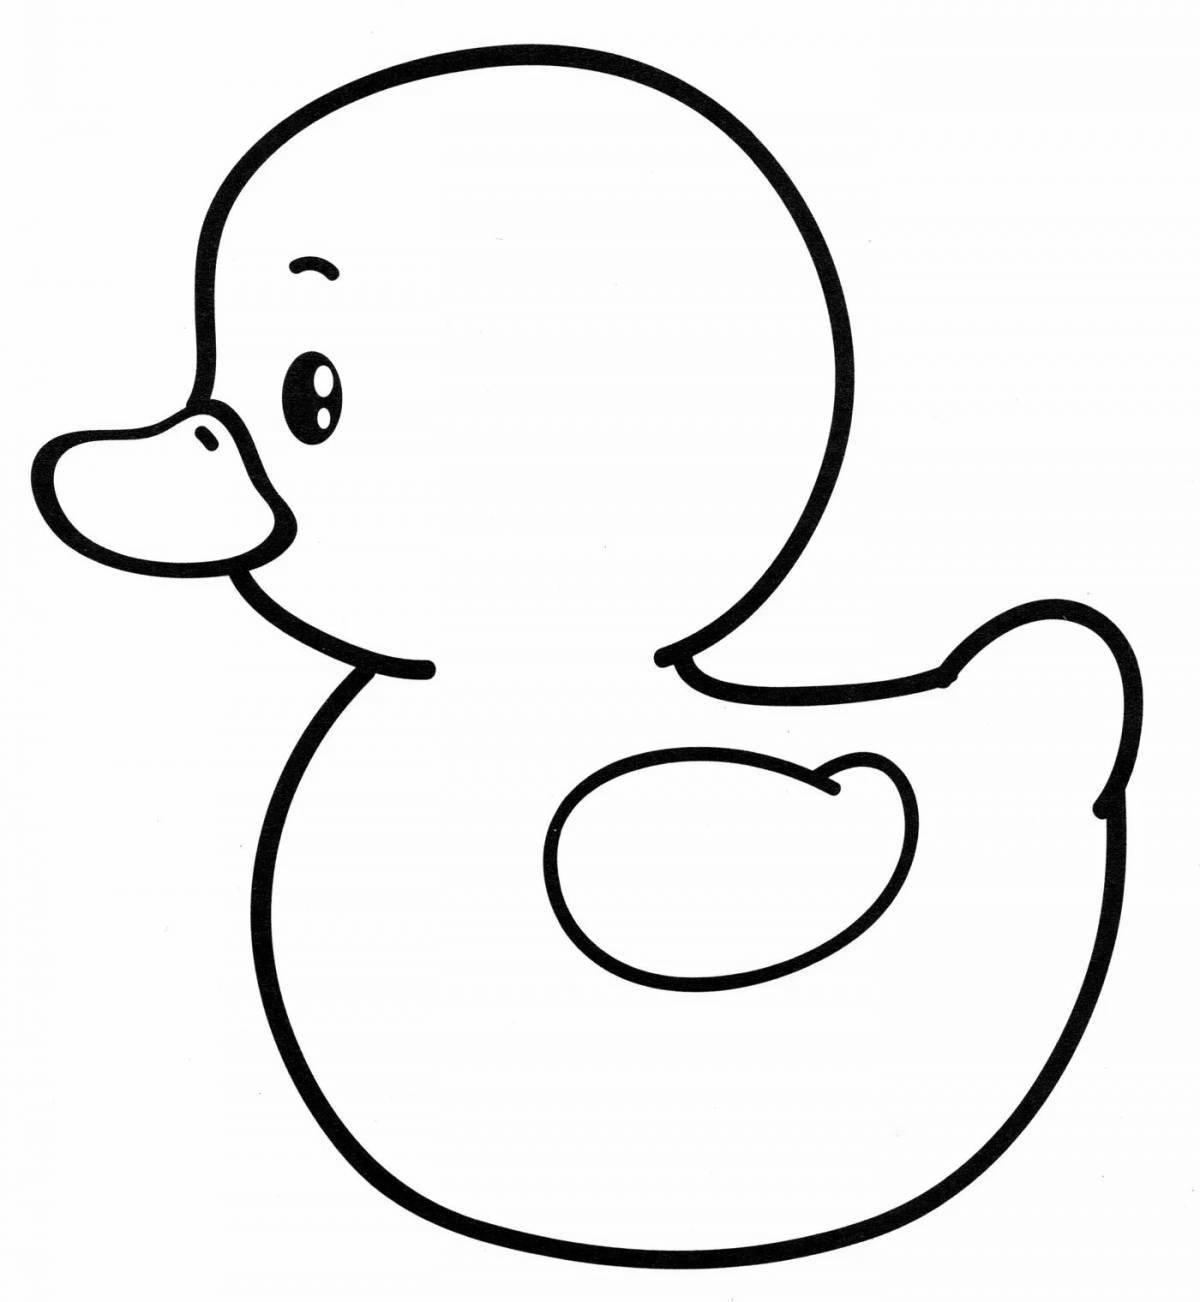 Duck for kids #12